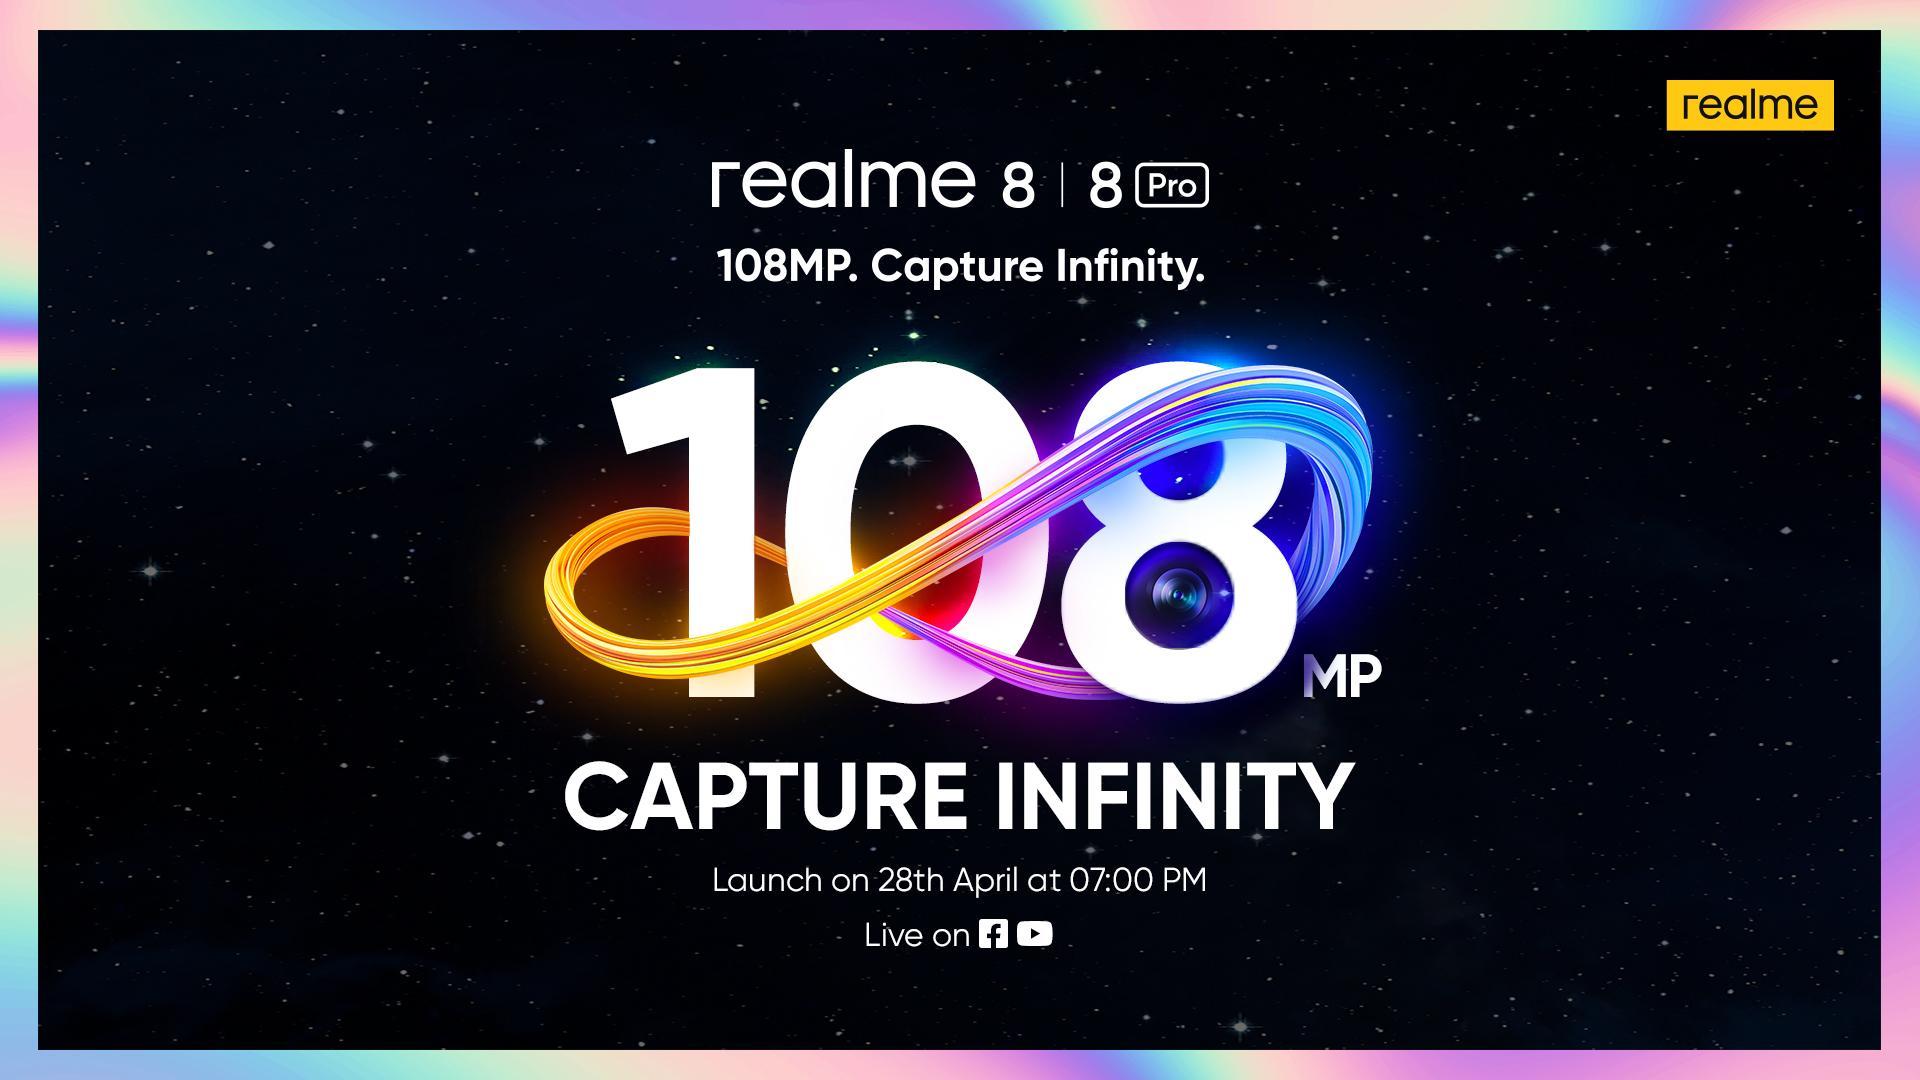 A Star-studded Launch of the realme 8 Series Awaits with a Spectacular Product Line-up